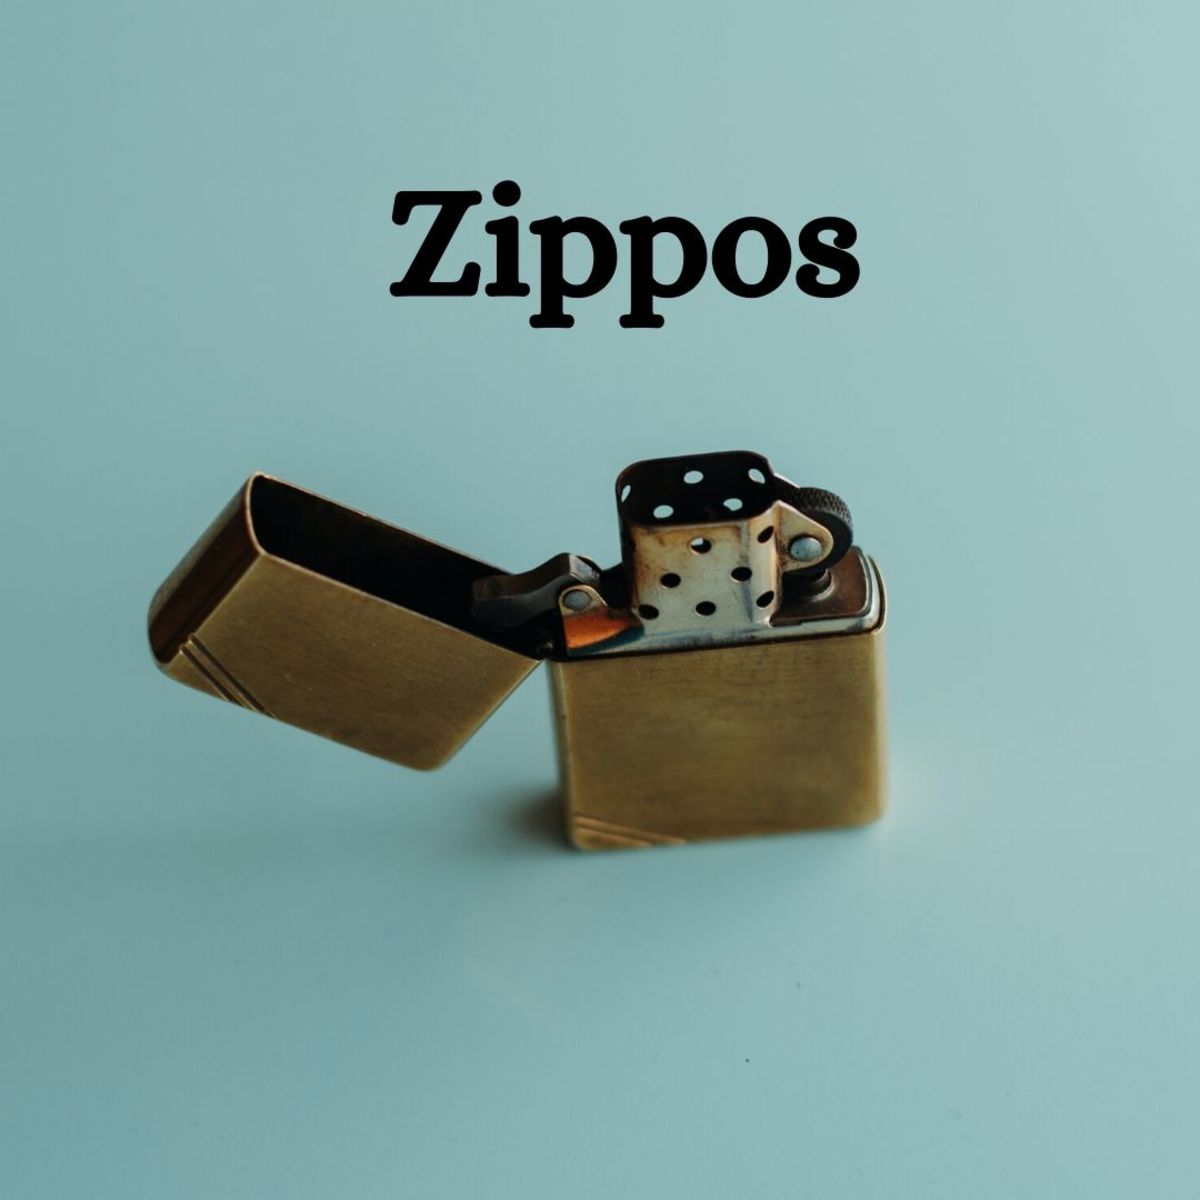 Start a Zippo lighter collection—they're cool and refillable!